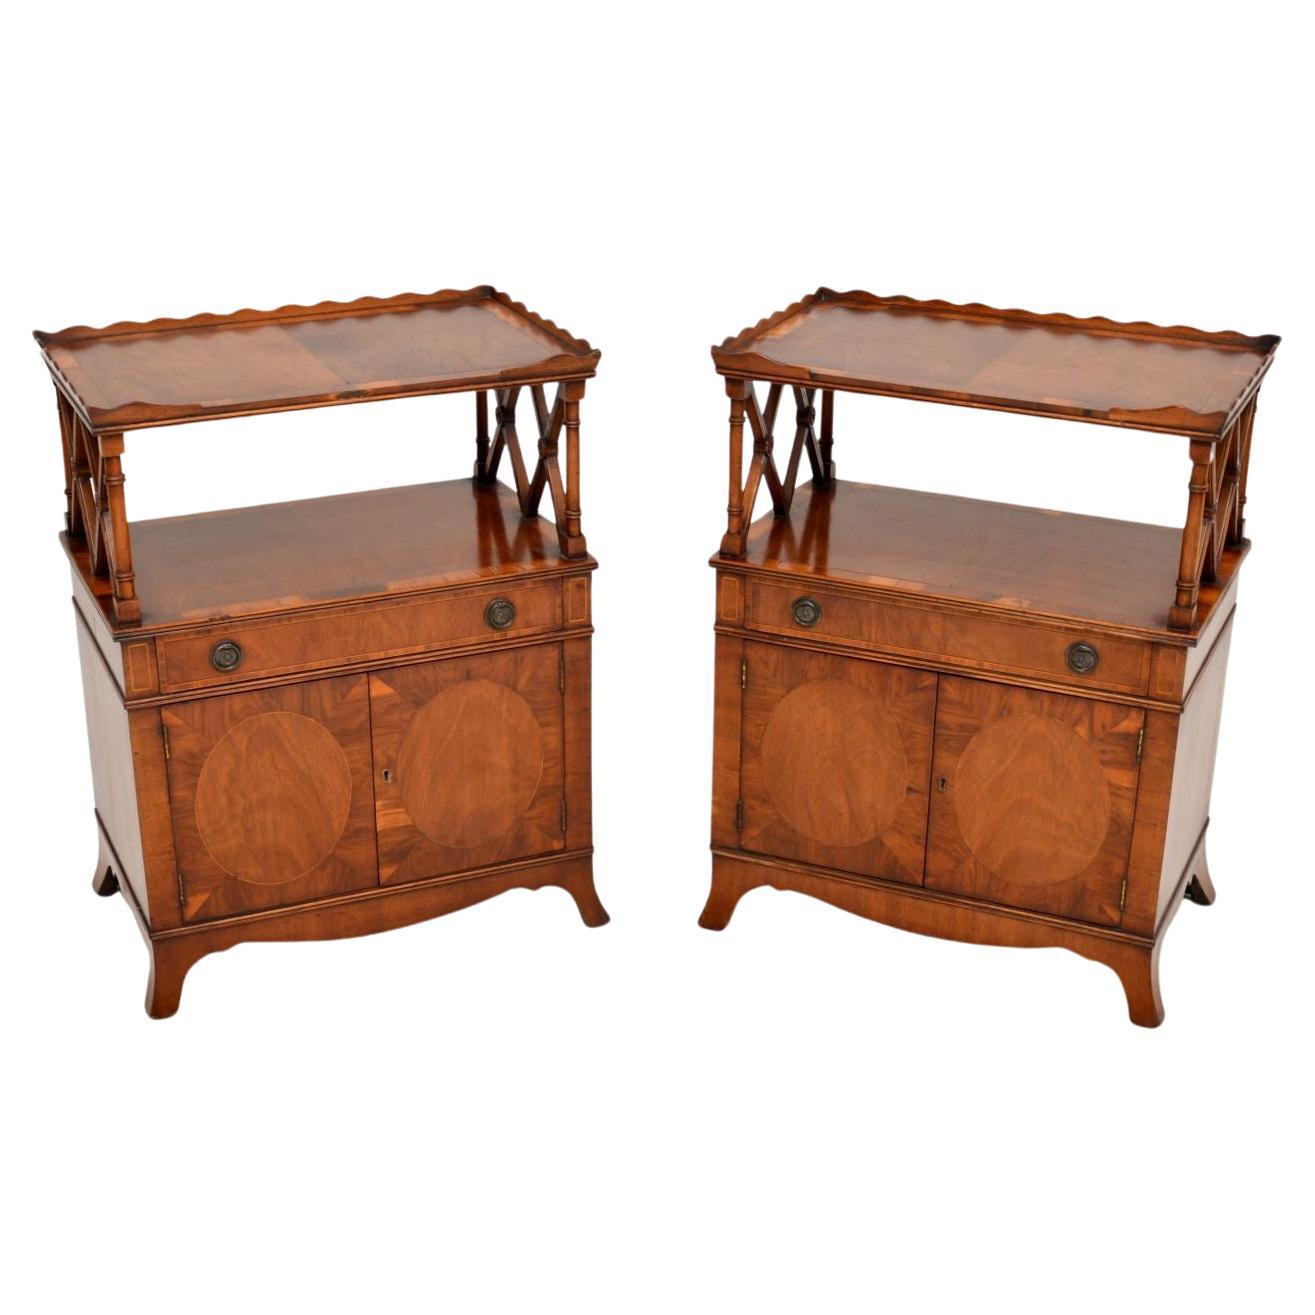 Pair of Antique Yew Wood Side Cabinets